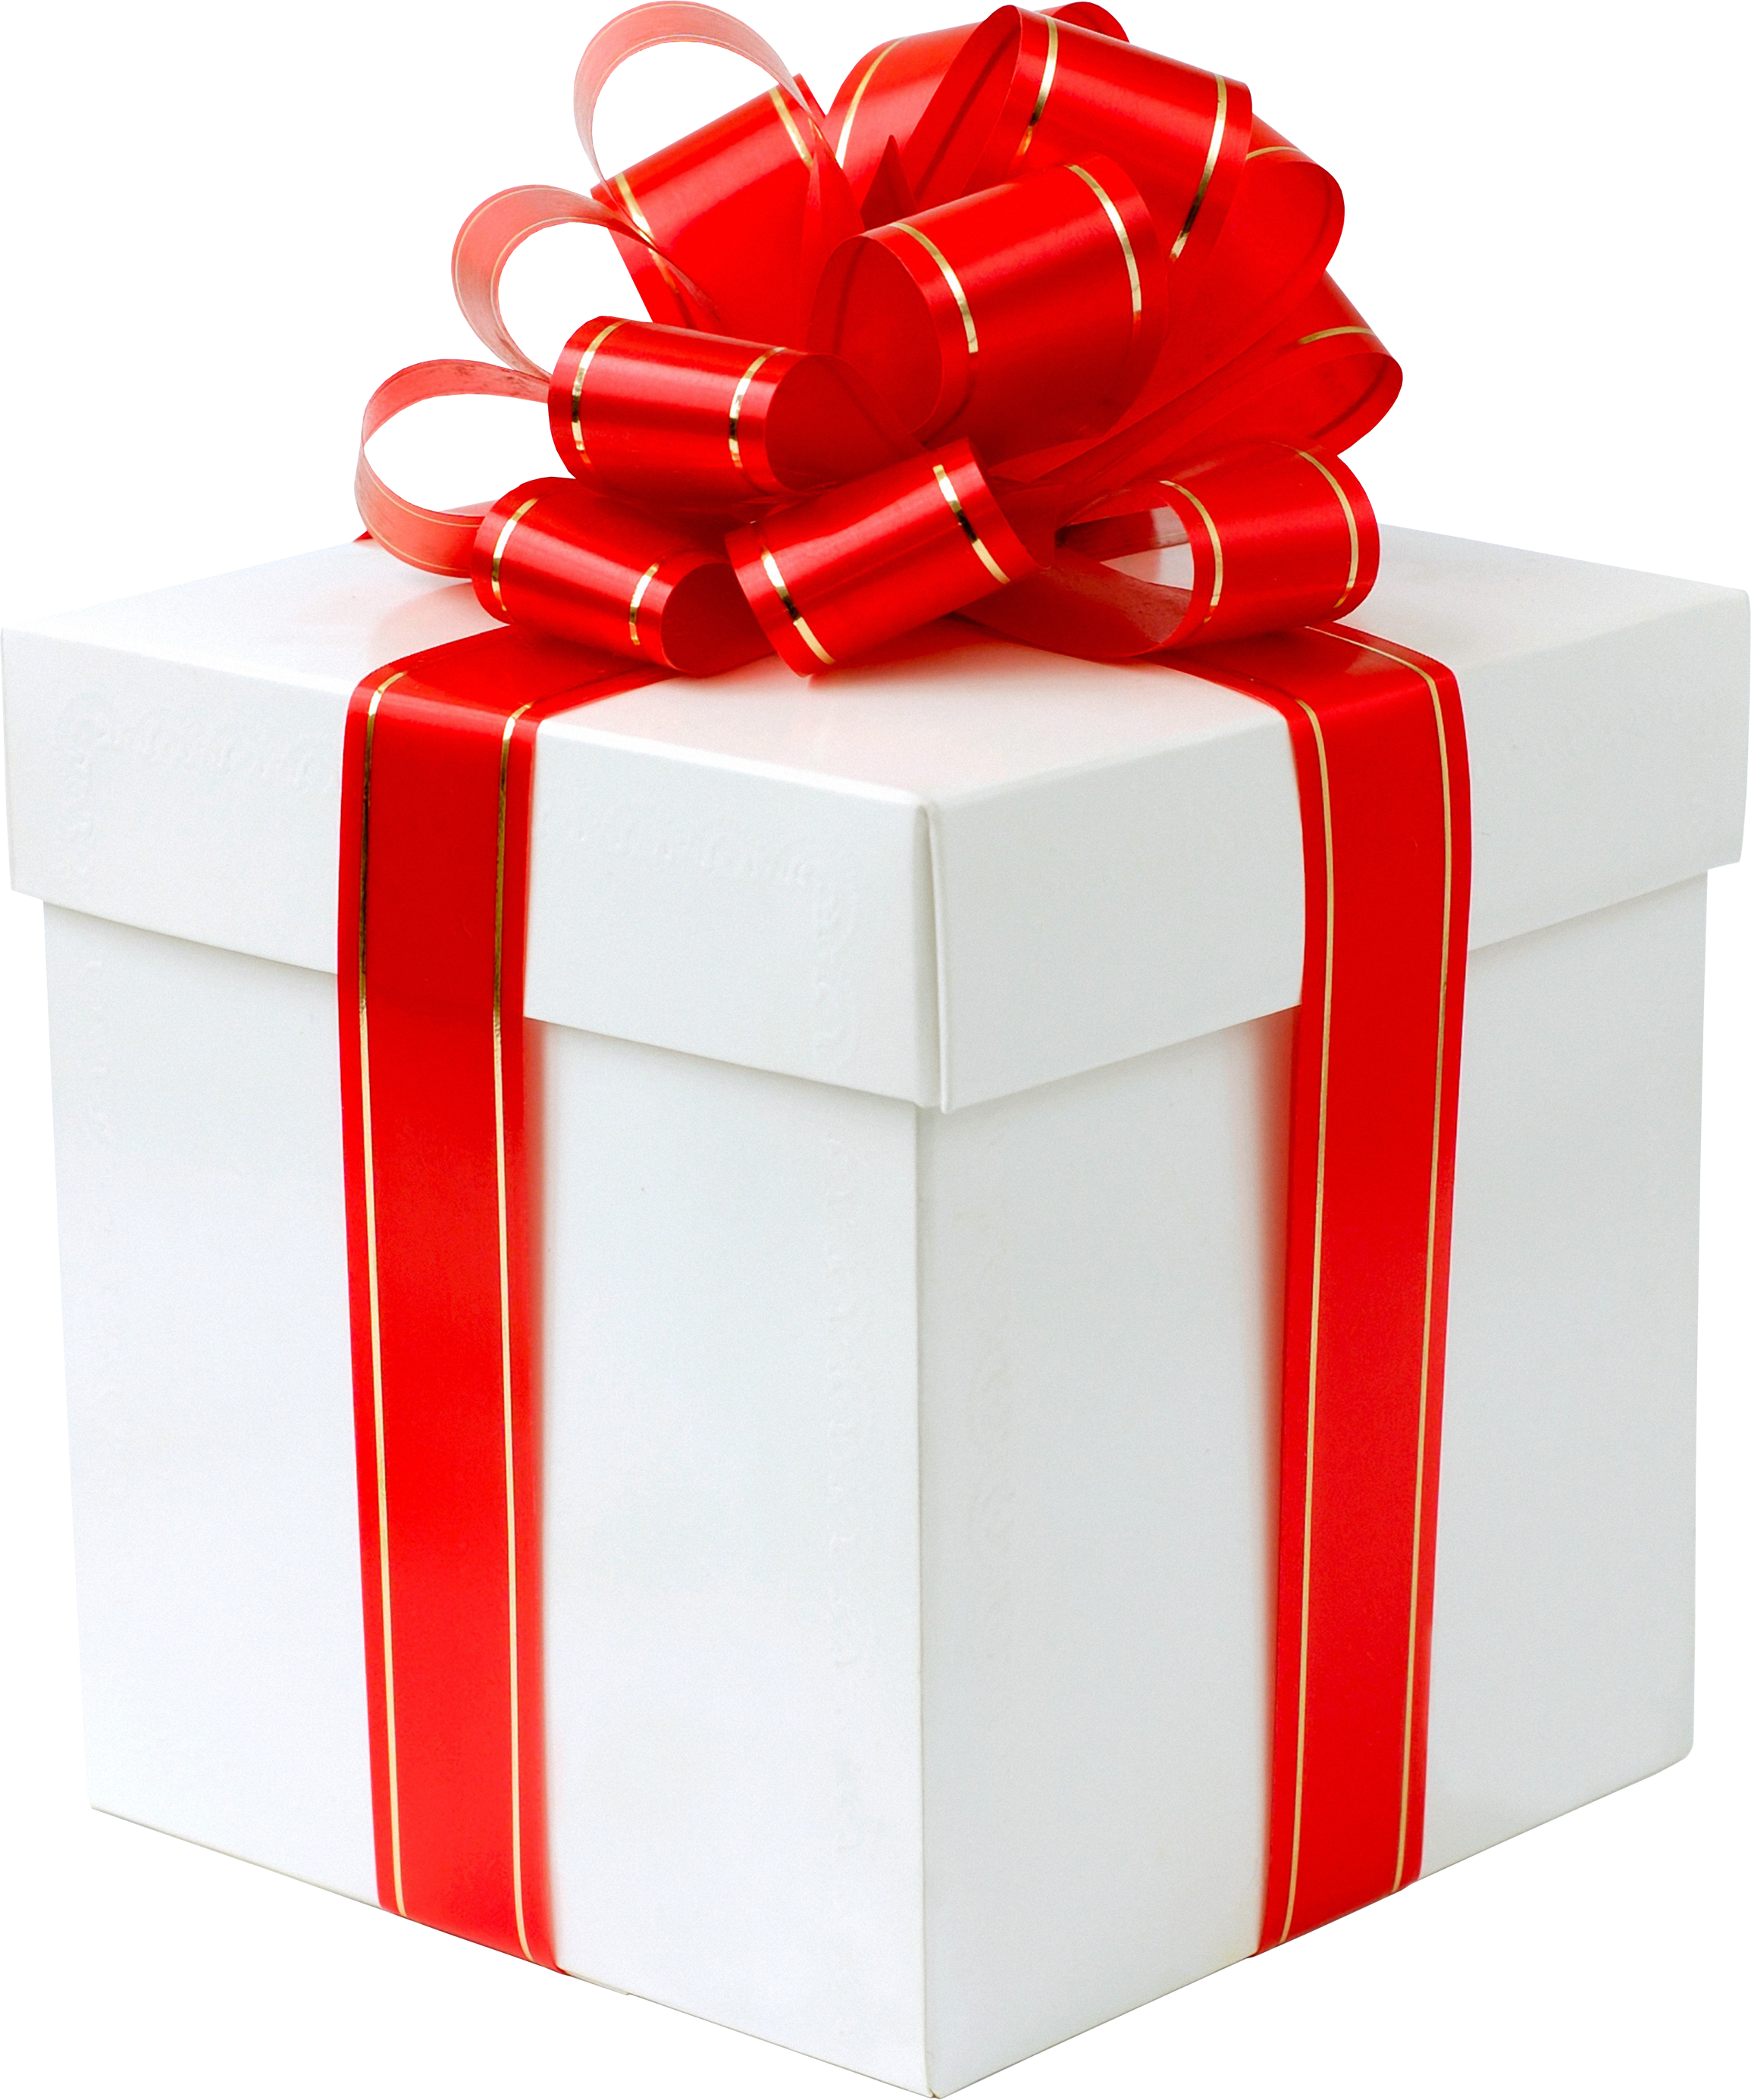 Gift box PNG image transparent image download, size: 2310x2770px